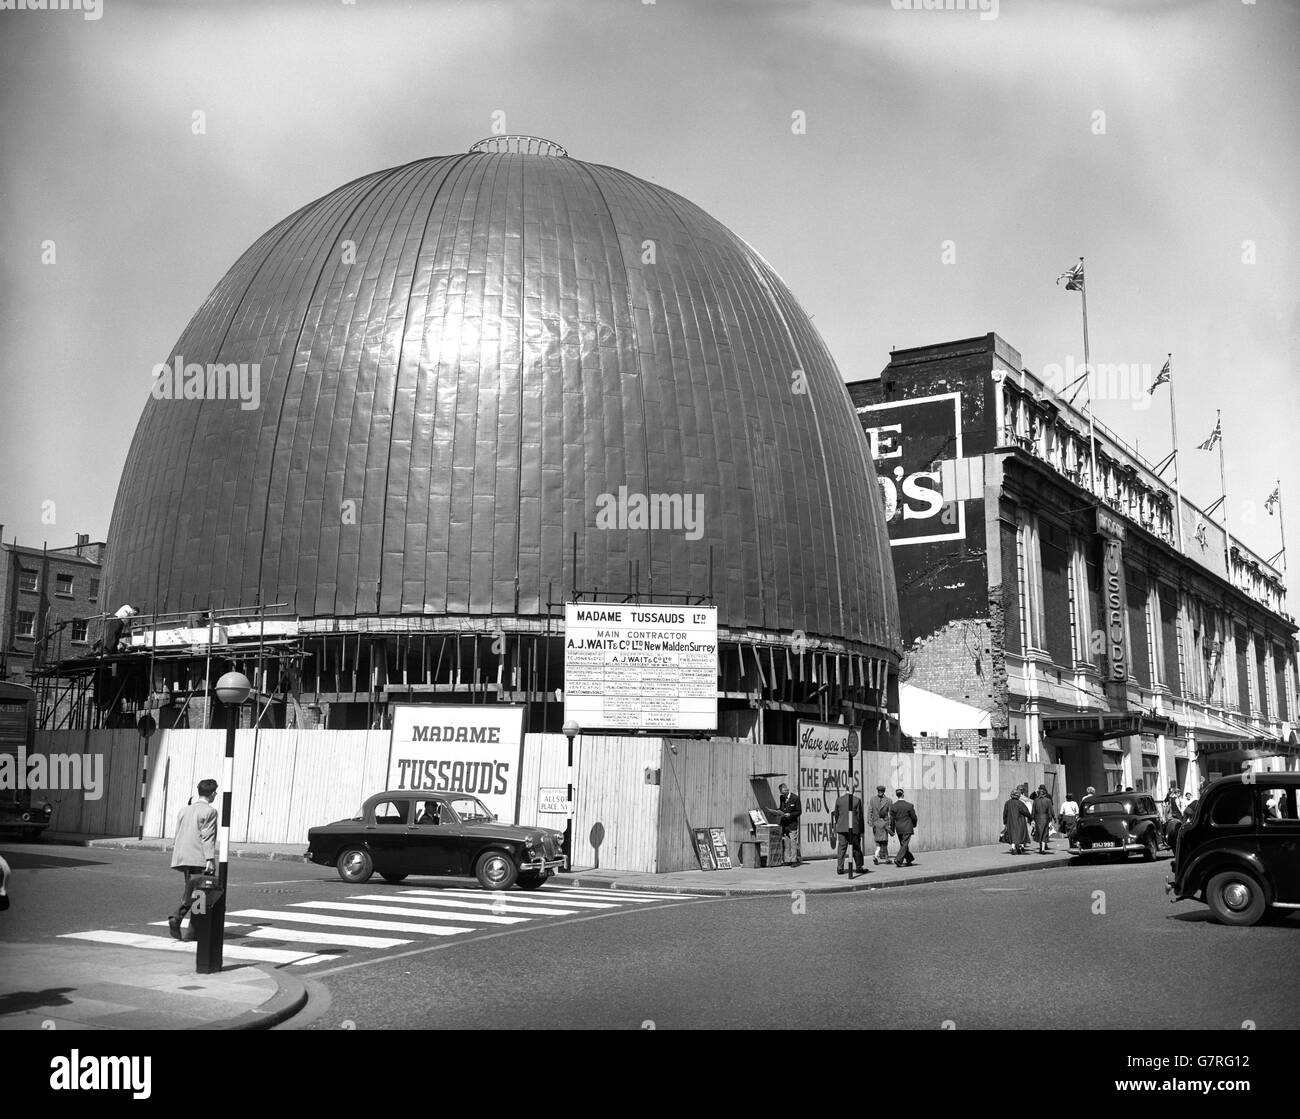 A huge beehive rises on a bombed site next to Madame Tussaud's waxworks exhibition in Marylebone Road, London. In the autumn it will open as the first-ever planetarium in Britain and the Commonwealth. Once opened, visitors will be able to see movements of the stars and planets projected on the ceiling of the dome by optical equipment, which is now being made at the Zeiss works at Oberkochen, West Germany. The planetarium is being built for Tussaud's and its opening will mark the exhibition's bicentenary. The dome is 73 feet in diameter. Inside, there will be seating room for some 500 people. Stock Photo